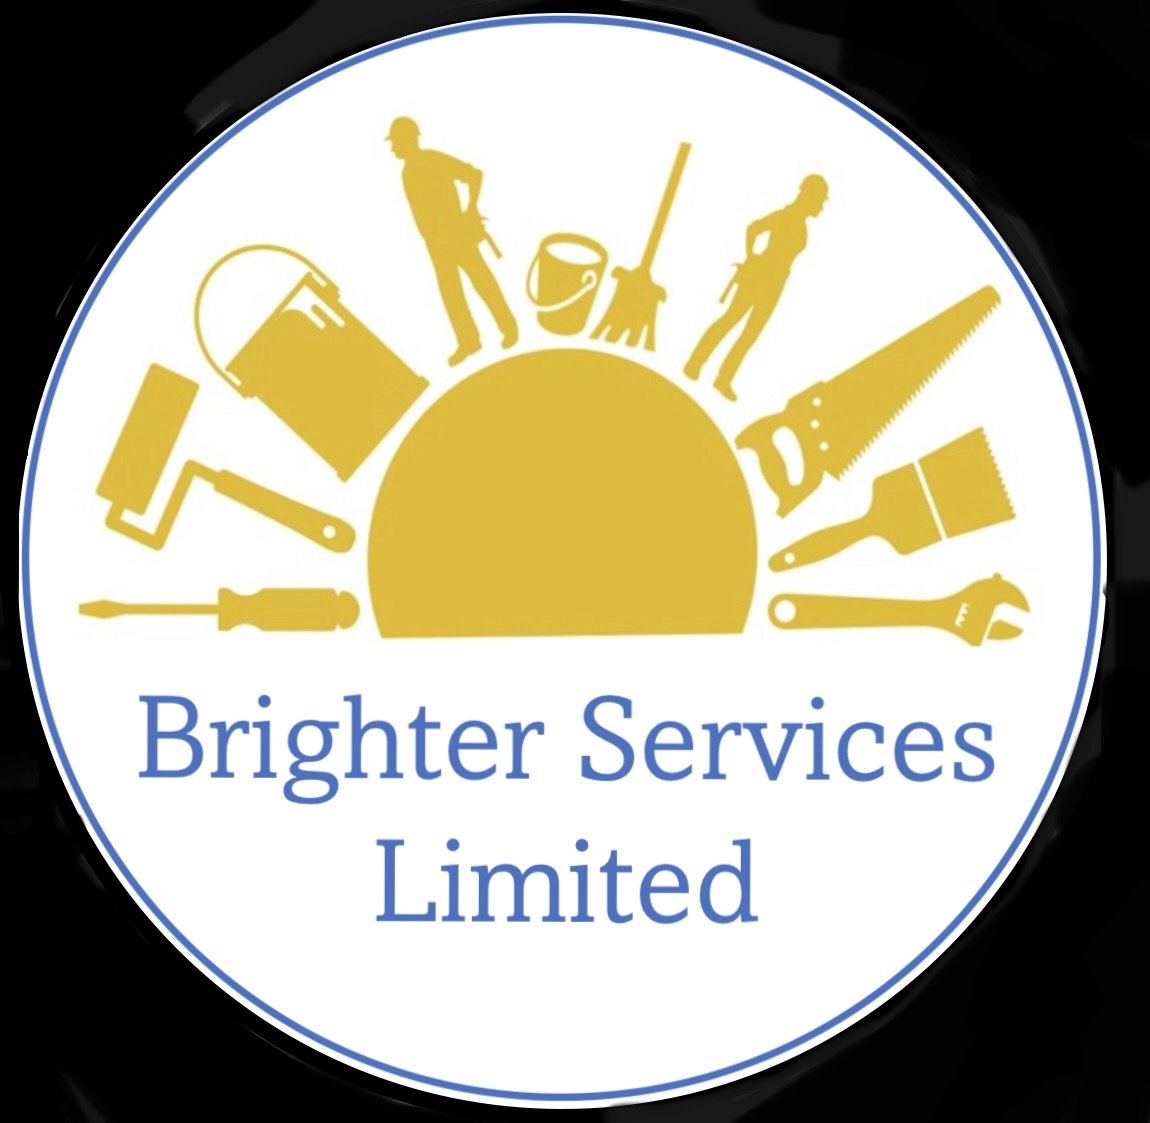 Brighter Services Limited